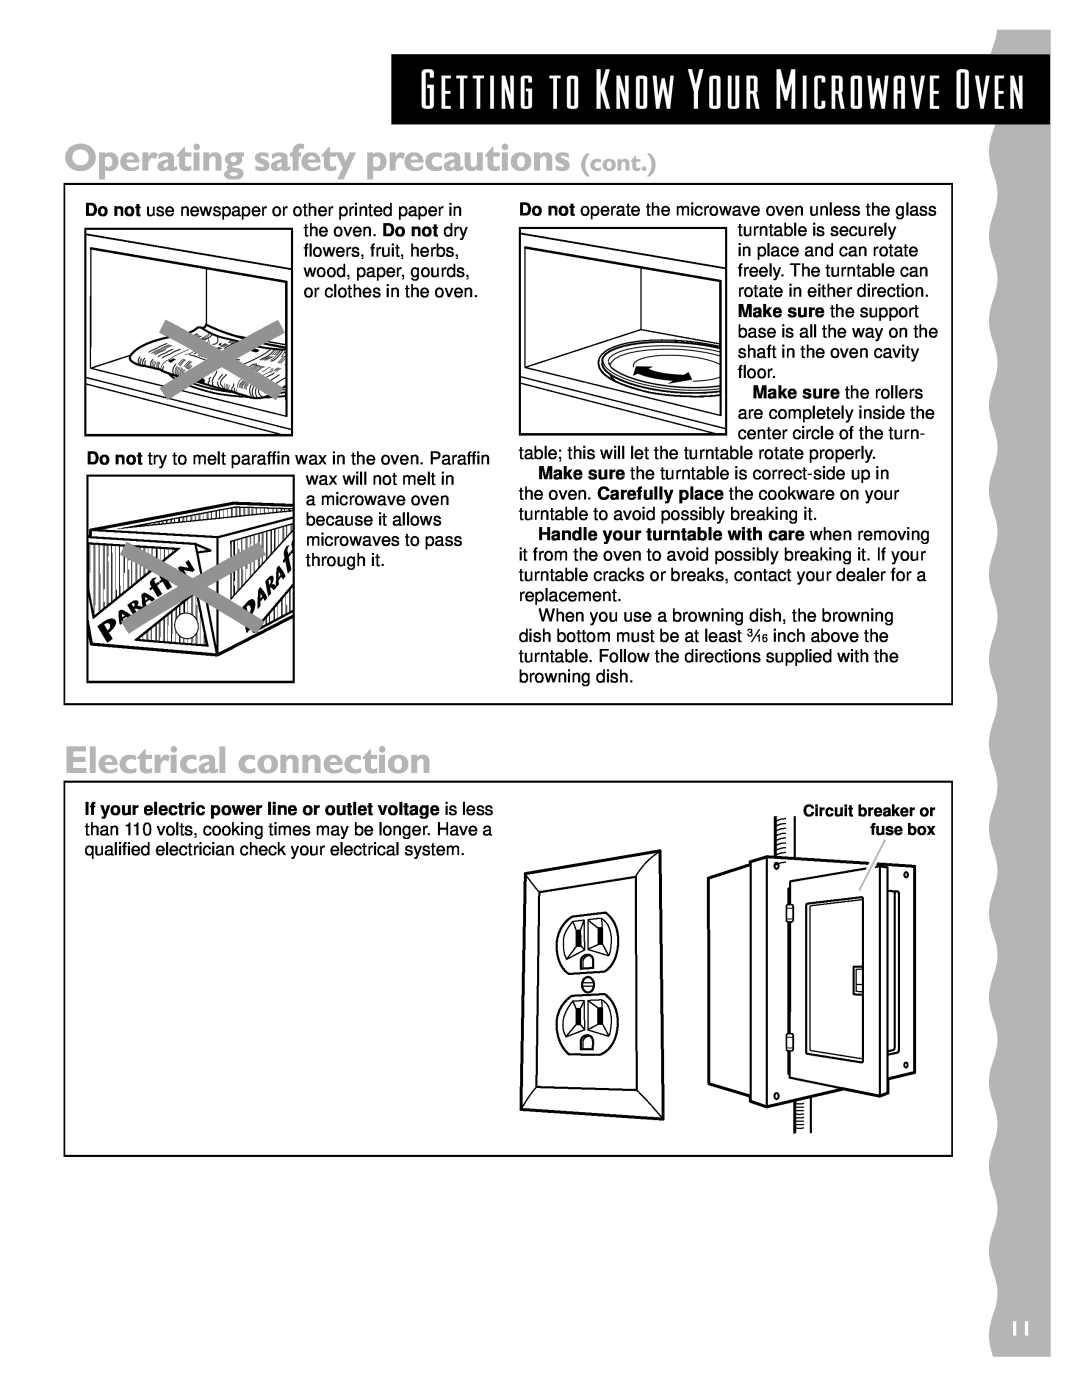 KitchenAid KCMS135H Operating safety precautions cont, Electrical connection, Getting to Know Your Microwave Oven 